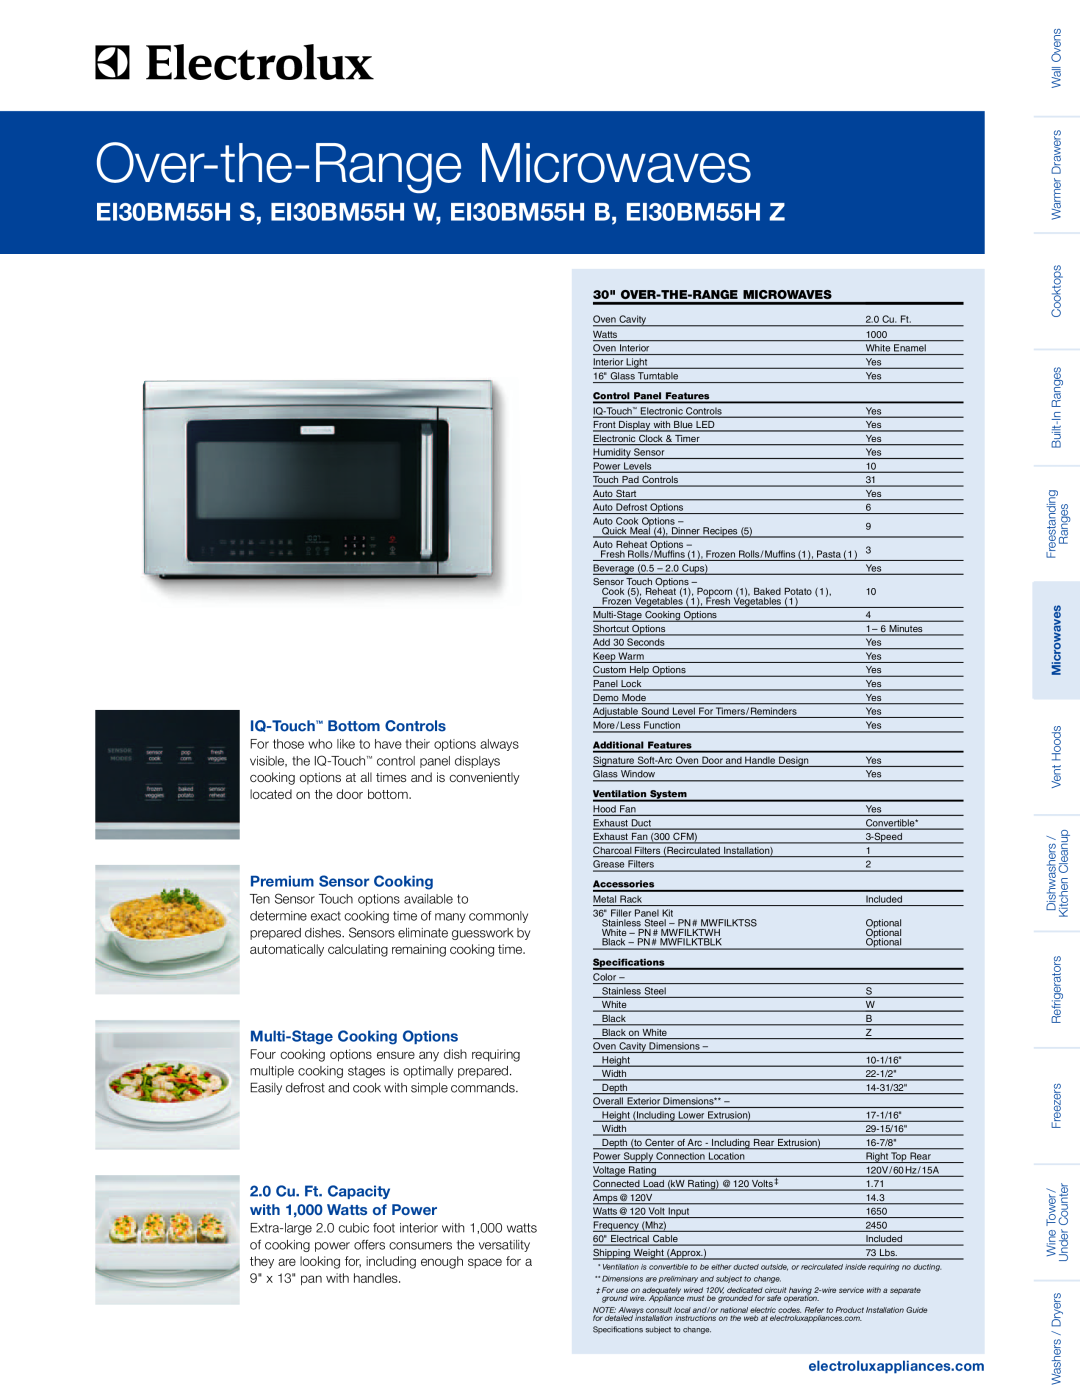 Electrolux EI30BM55HW specifications IQ-Touch Bottom Controls, Premium Sensor Cooking, Multi-Stage Cooking Options 